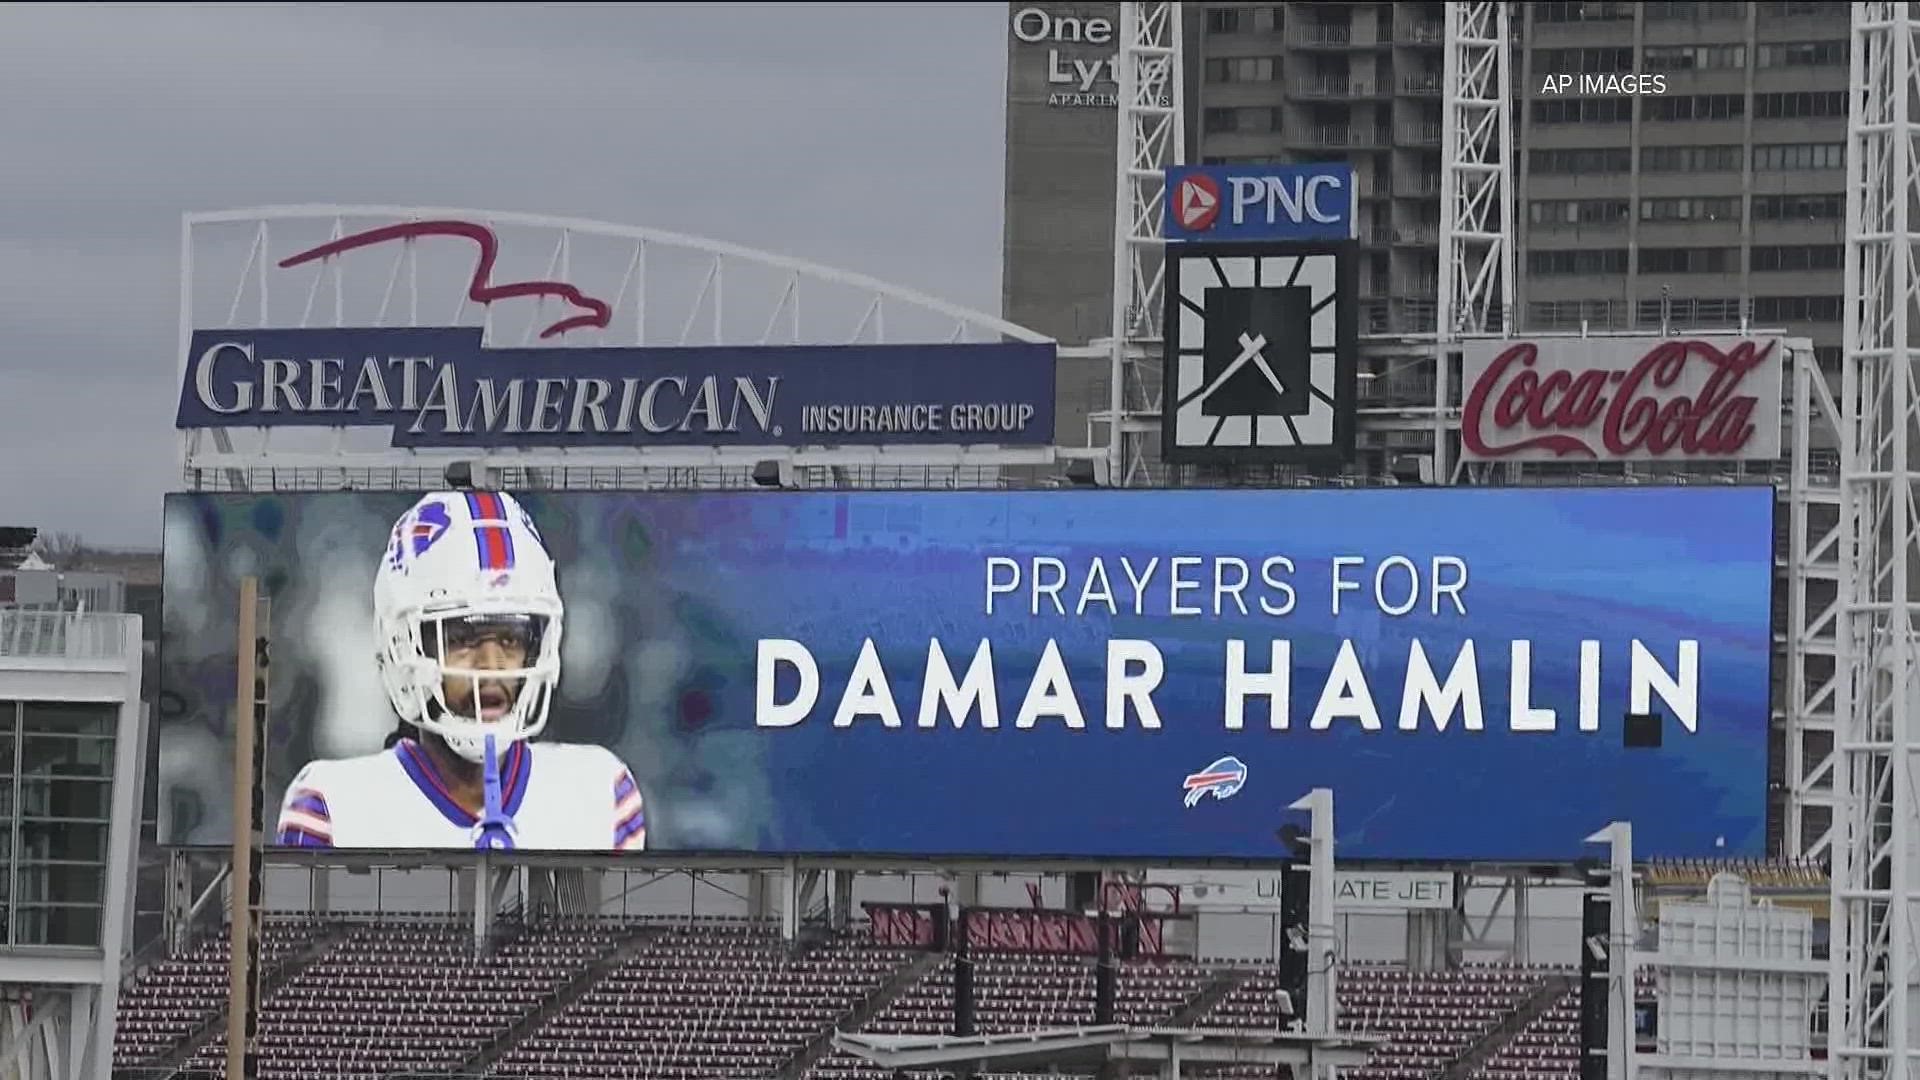 Although doctors said the Buffalo Bills safety is showing some signs of improvement, Damar Hamlin still remains in critical condition.